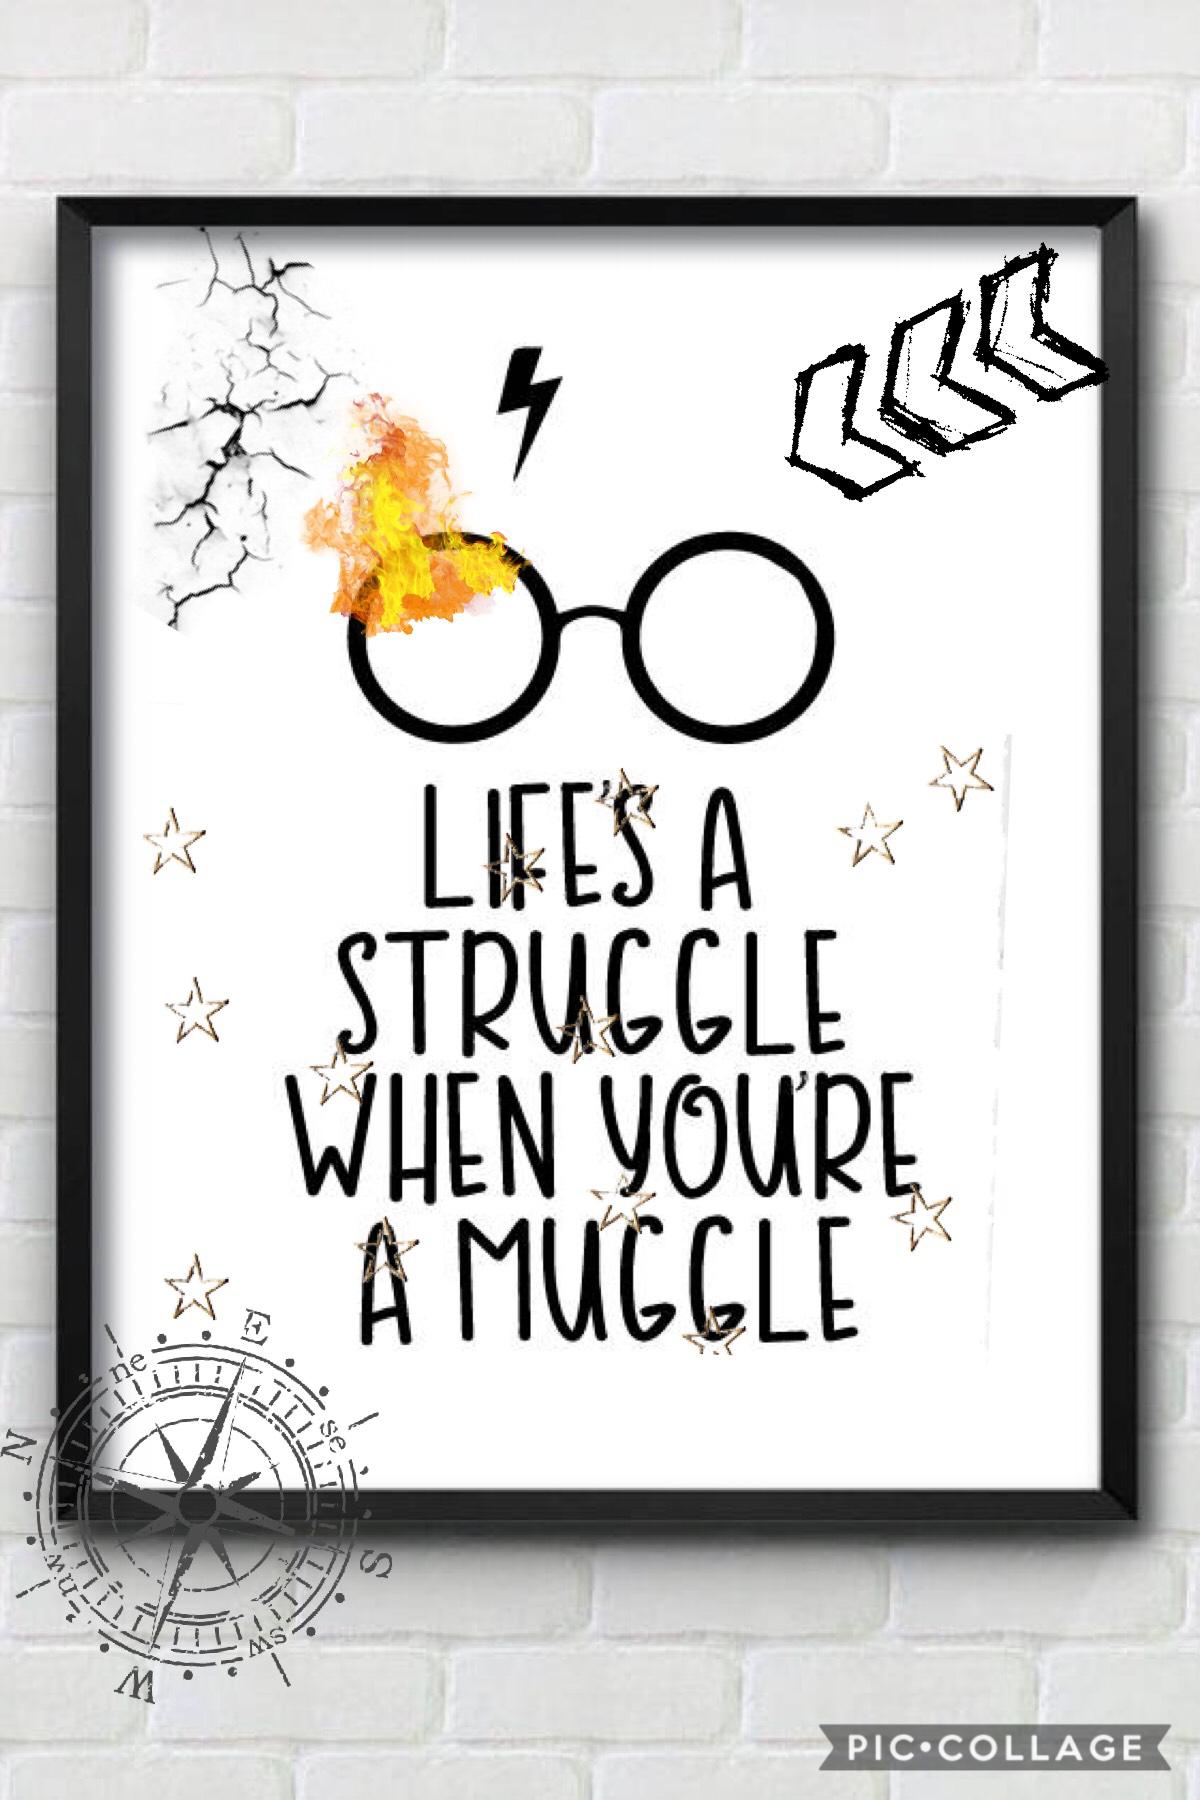 Nothing could be truer, and that’s from a muggle perspective.